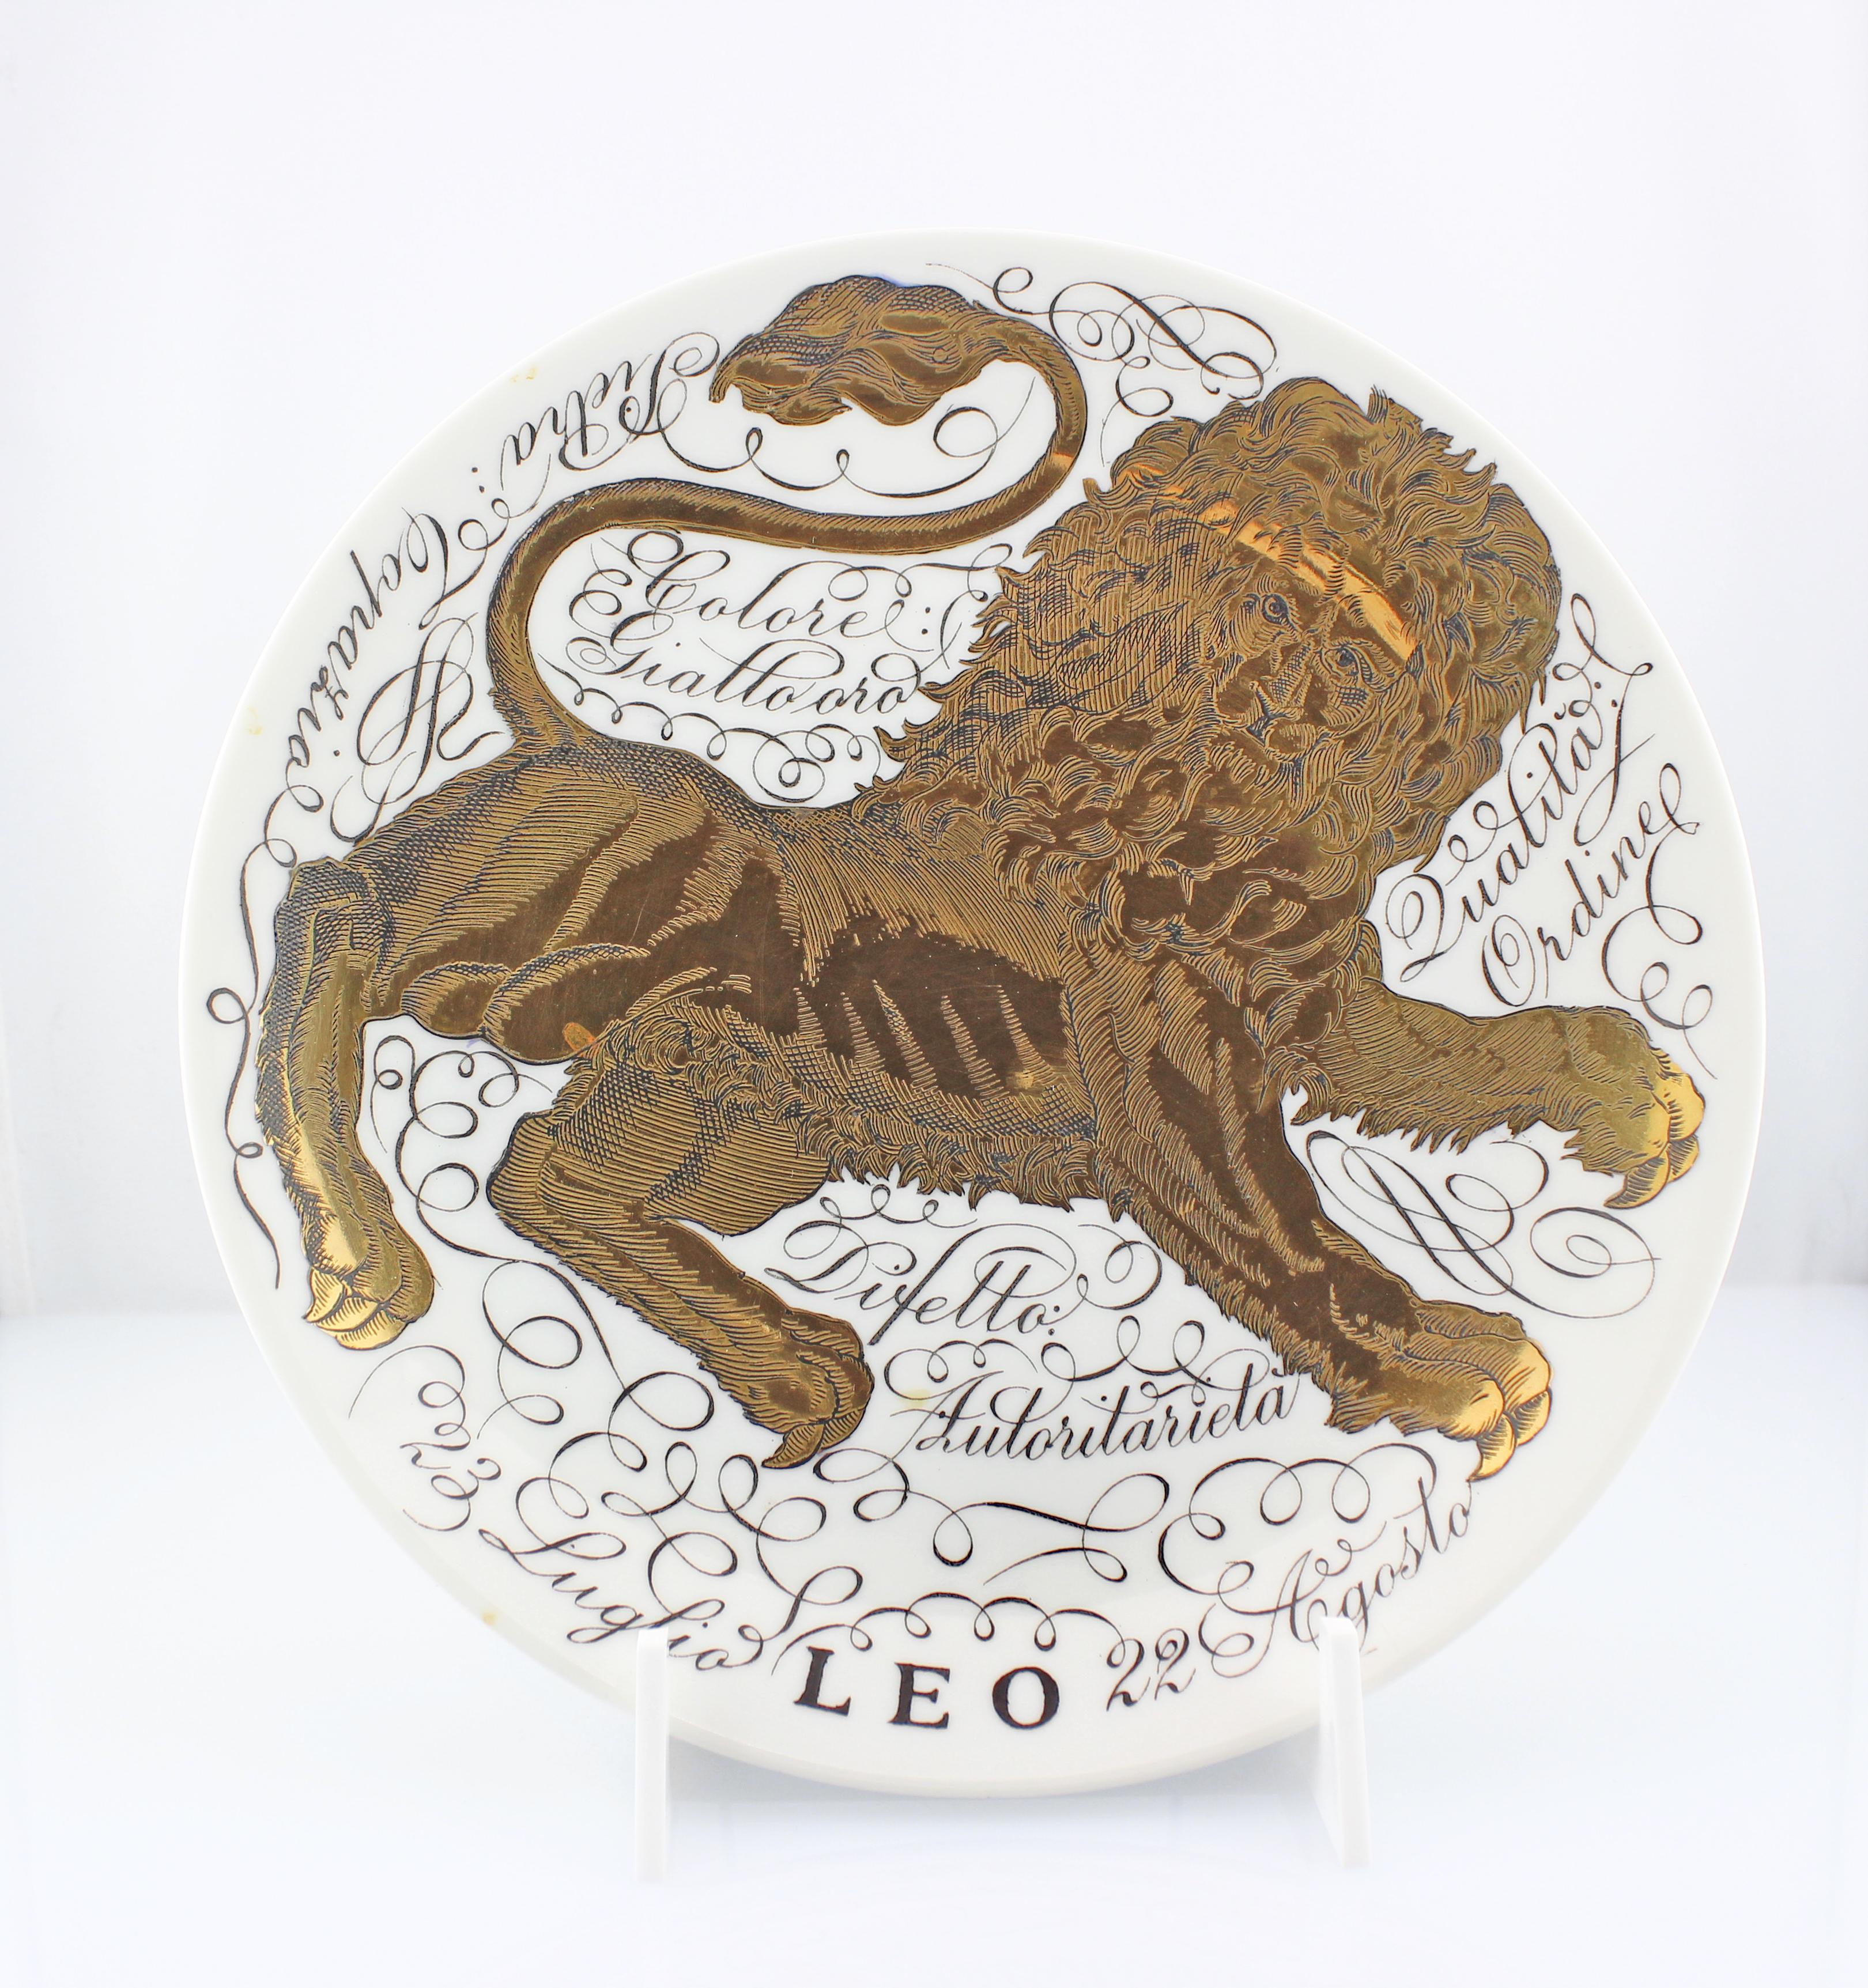 This rare and the most sought after collectibles vintage Piero Fornasetti porcelain lithographically-decorated and hand painted ceramic zodiac plate have a white background with words written in black color expressing the character and personality